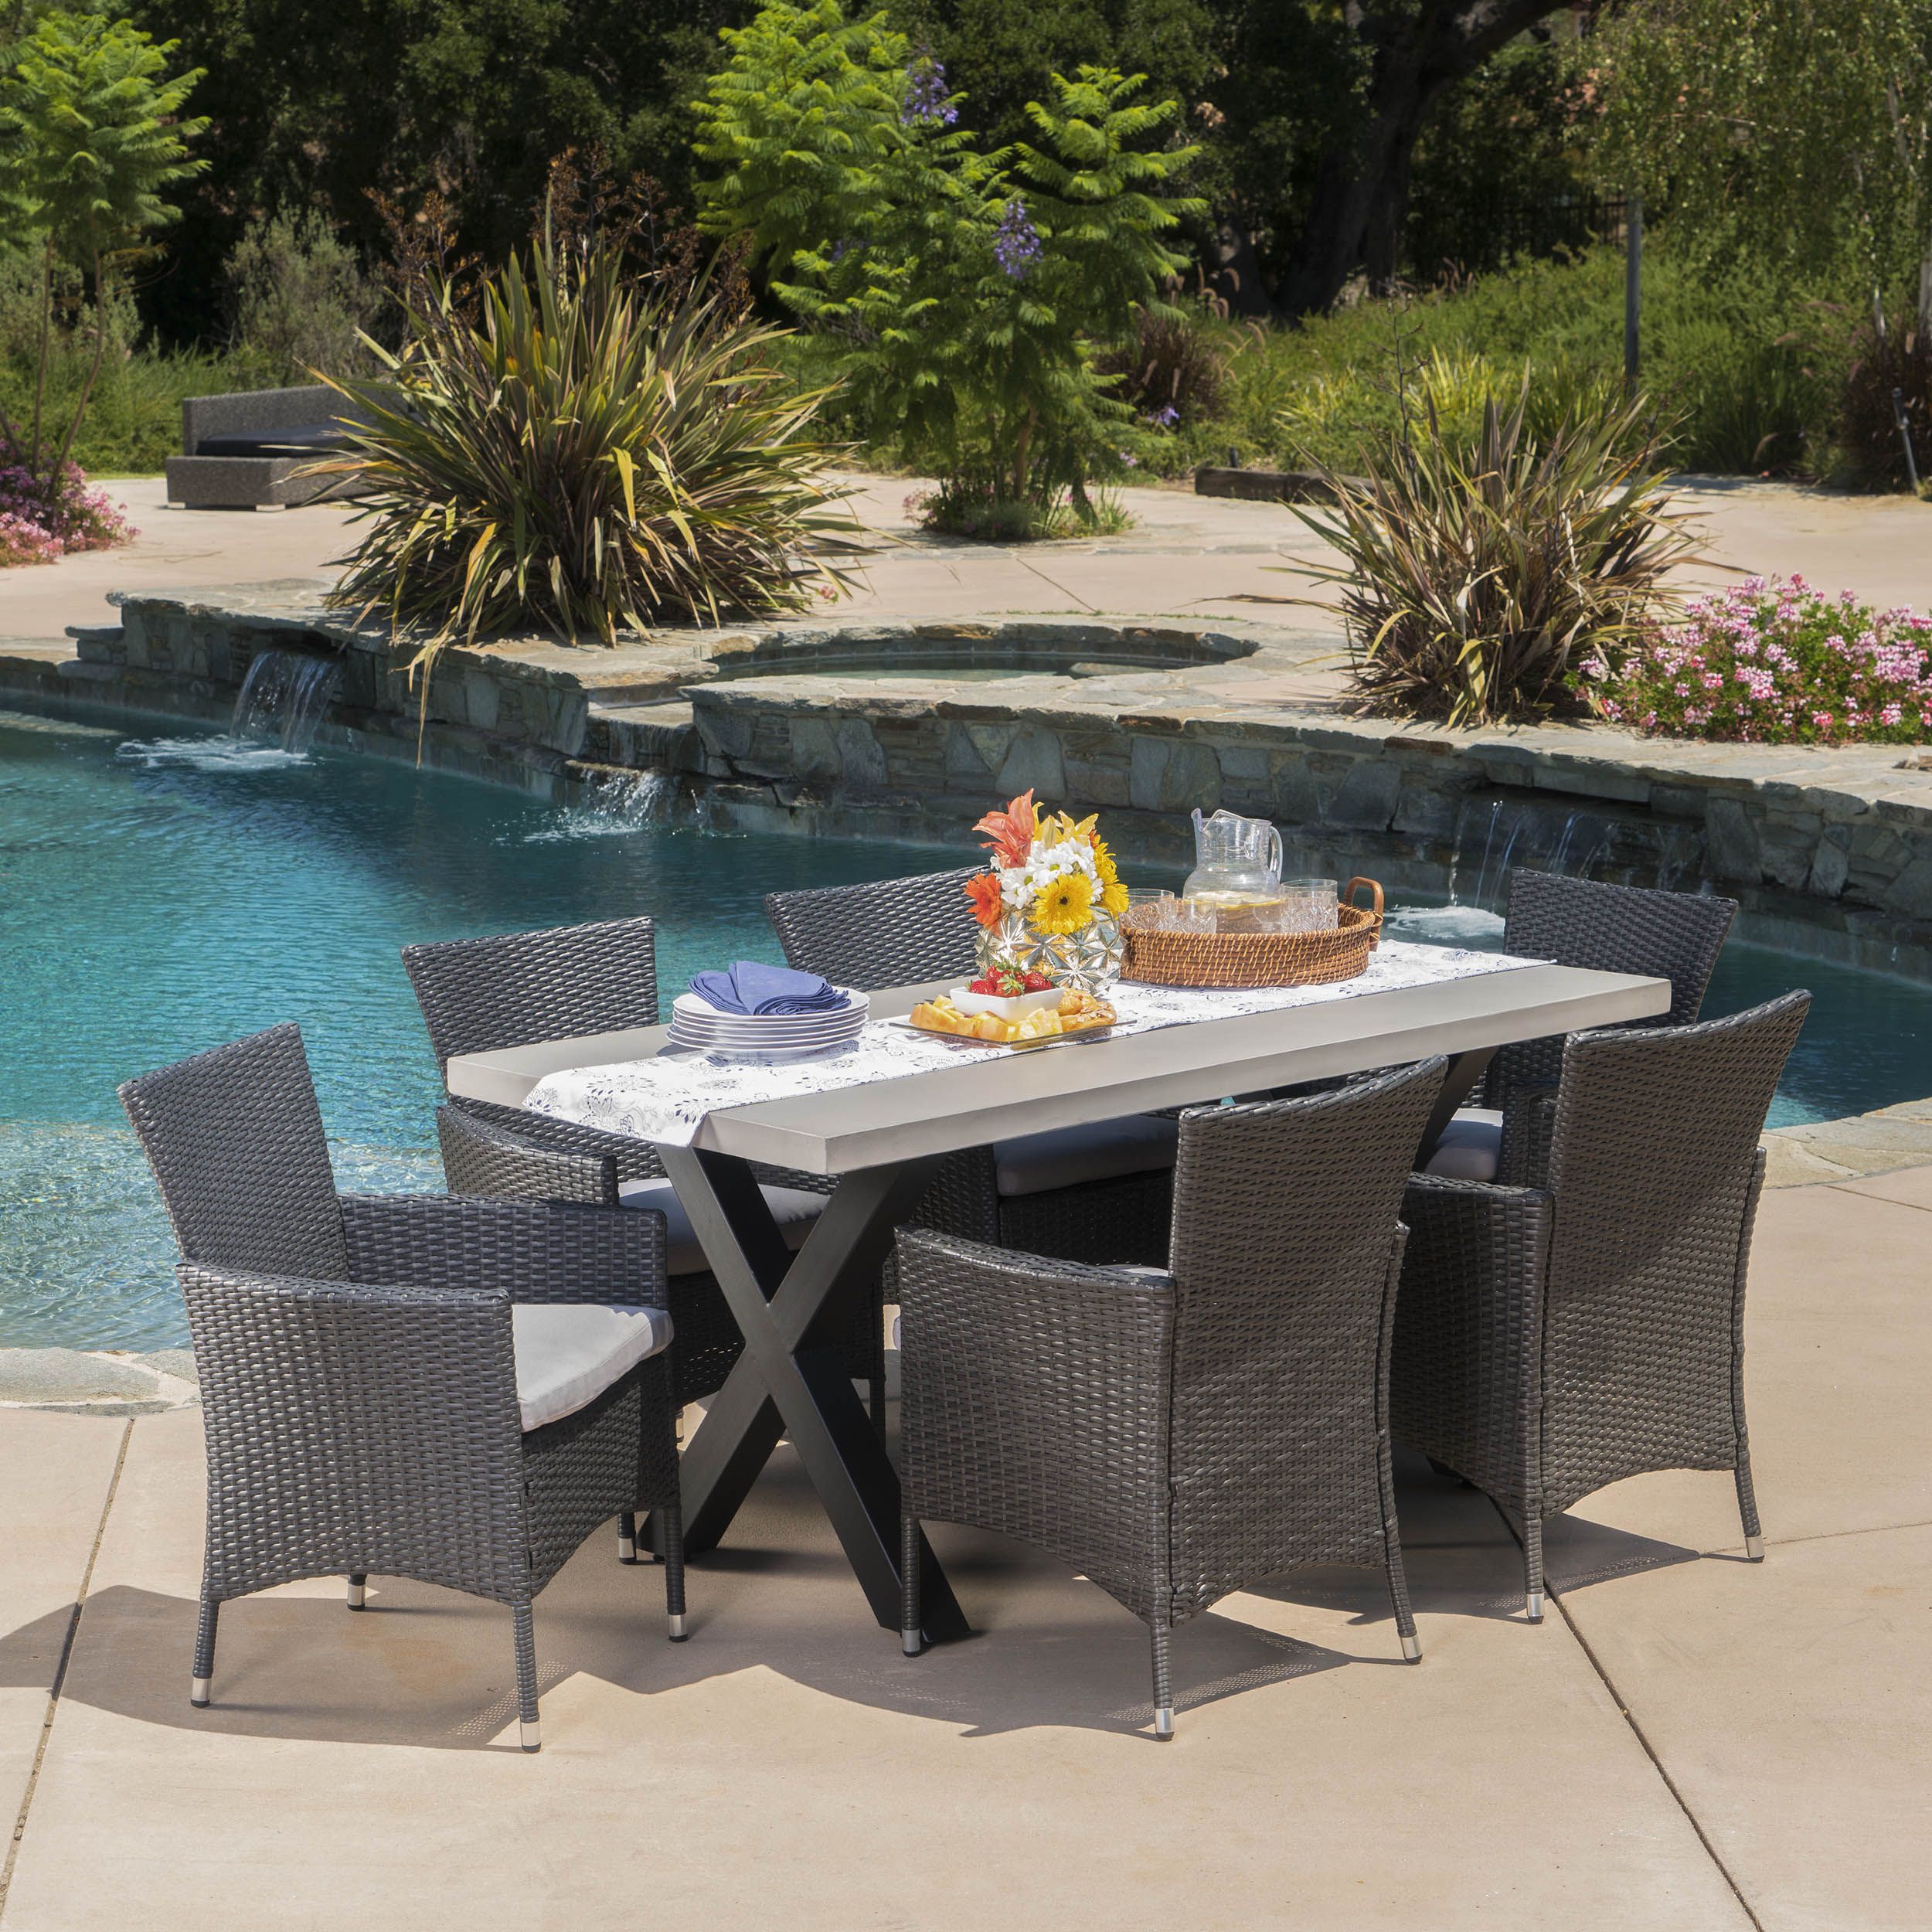 Shiloh Outdoor 7 Piece Dining Set With Concrete Rectangular Table And Inside White Rectangular Patio Dining Sets (View 13 of 15)